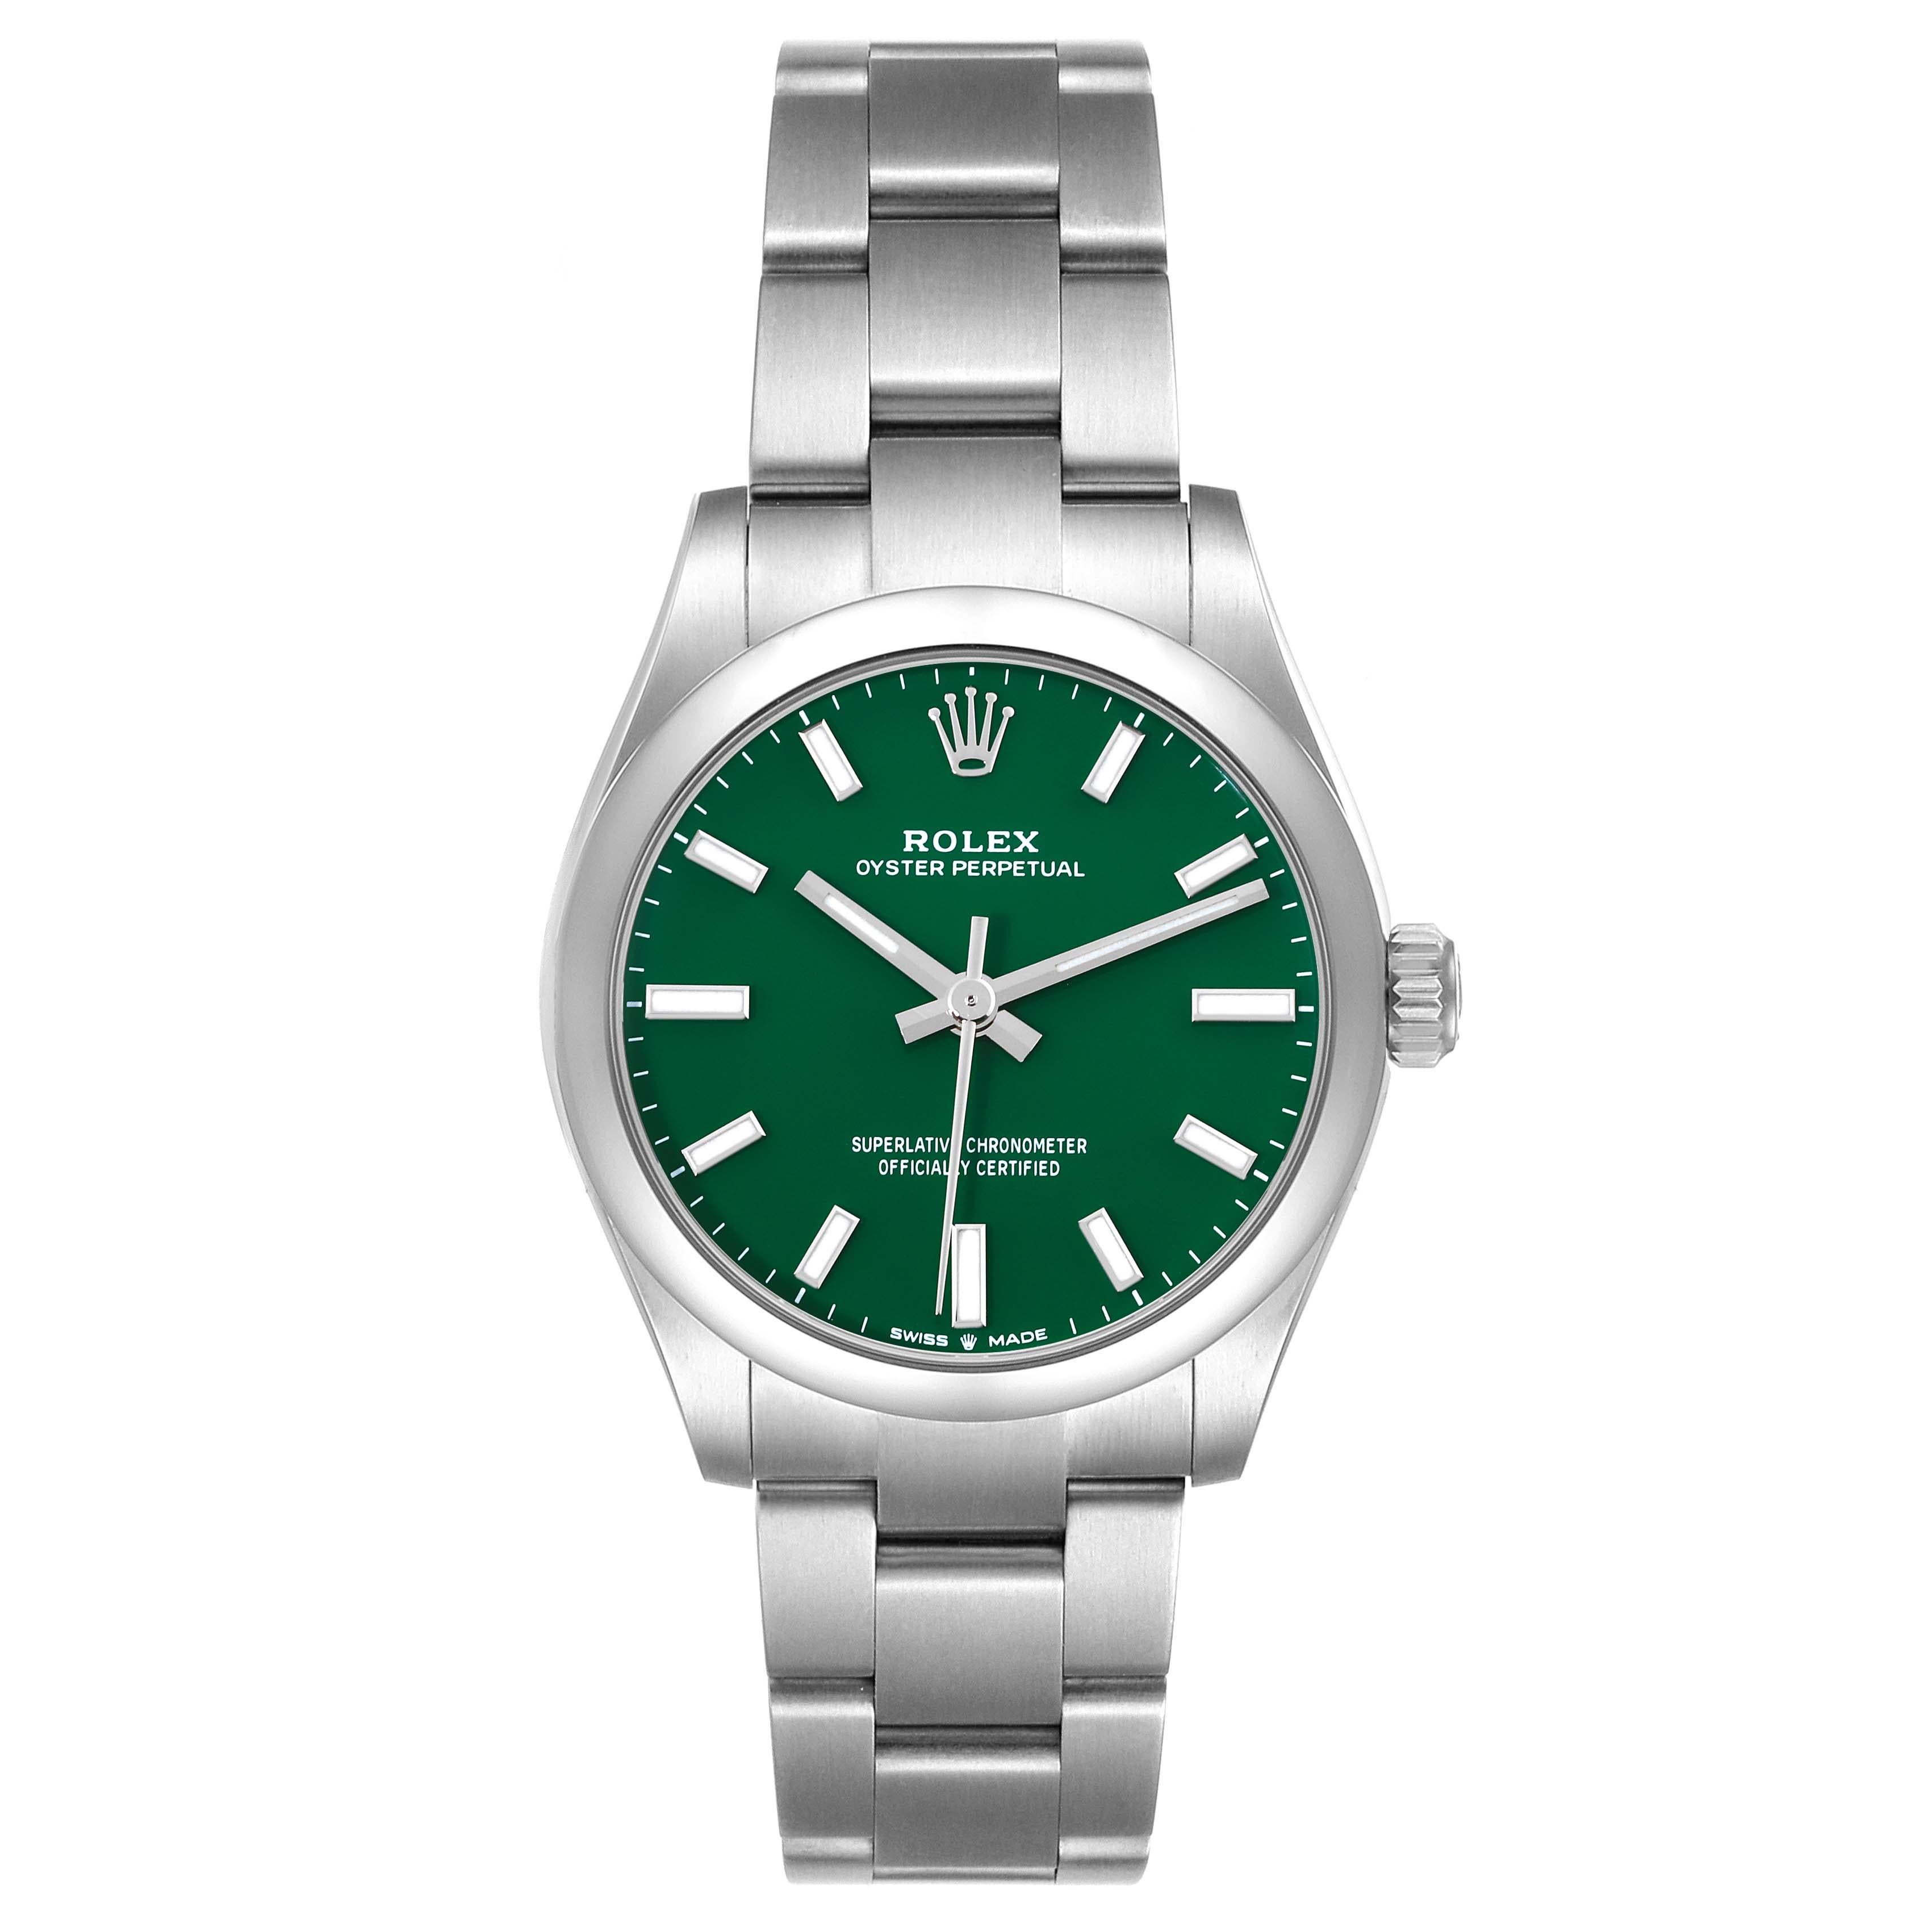 Rolex Oyster Perpetual Midsize Green Dial Automatic Steel Ladies Watch 277200. Automatic self-winding movement. Stainless steel oyster case 31.0 mm in diameter. Rolex logo on a crown. Stainless steel smooth bezel. Scratch resistant sapphire crystal.